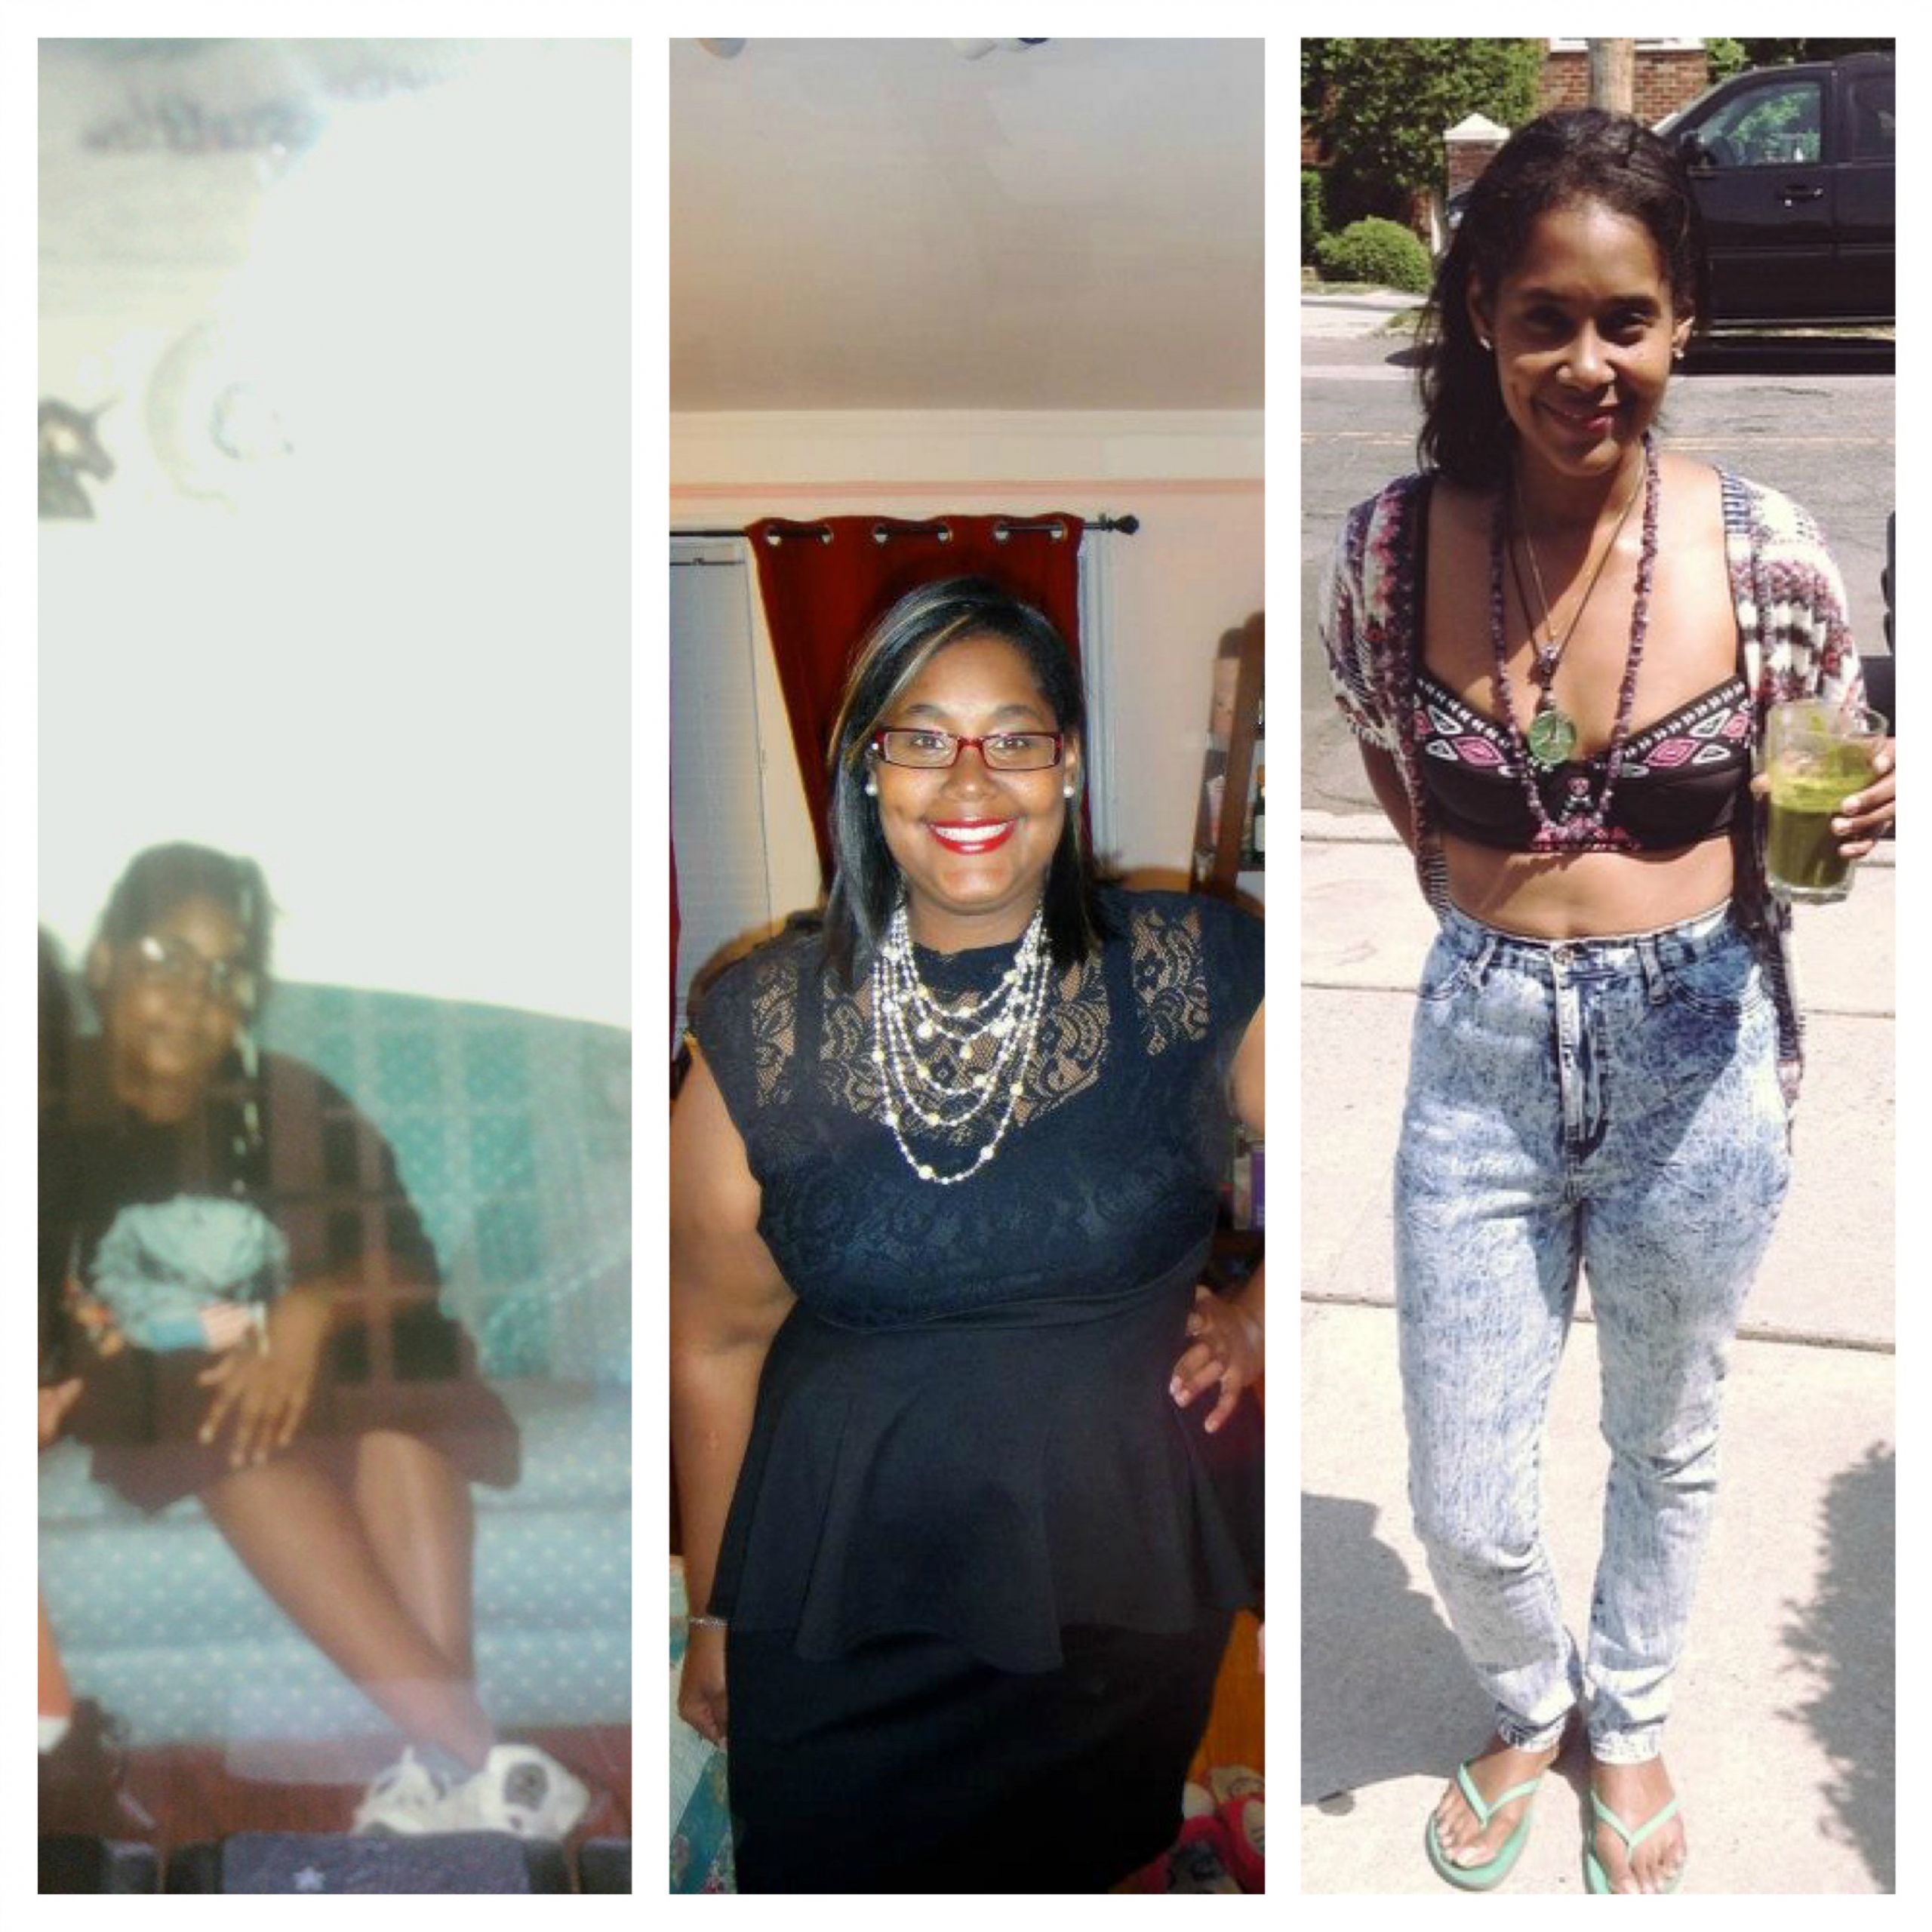 Plant Based Diet Before And After
 Angela Fights To Lose Over 100 Pounds With Vegan Lifestyle